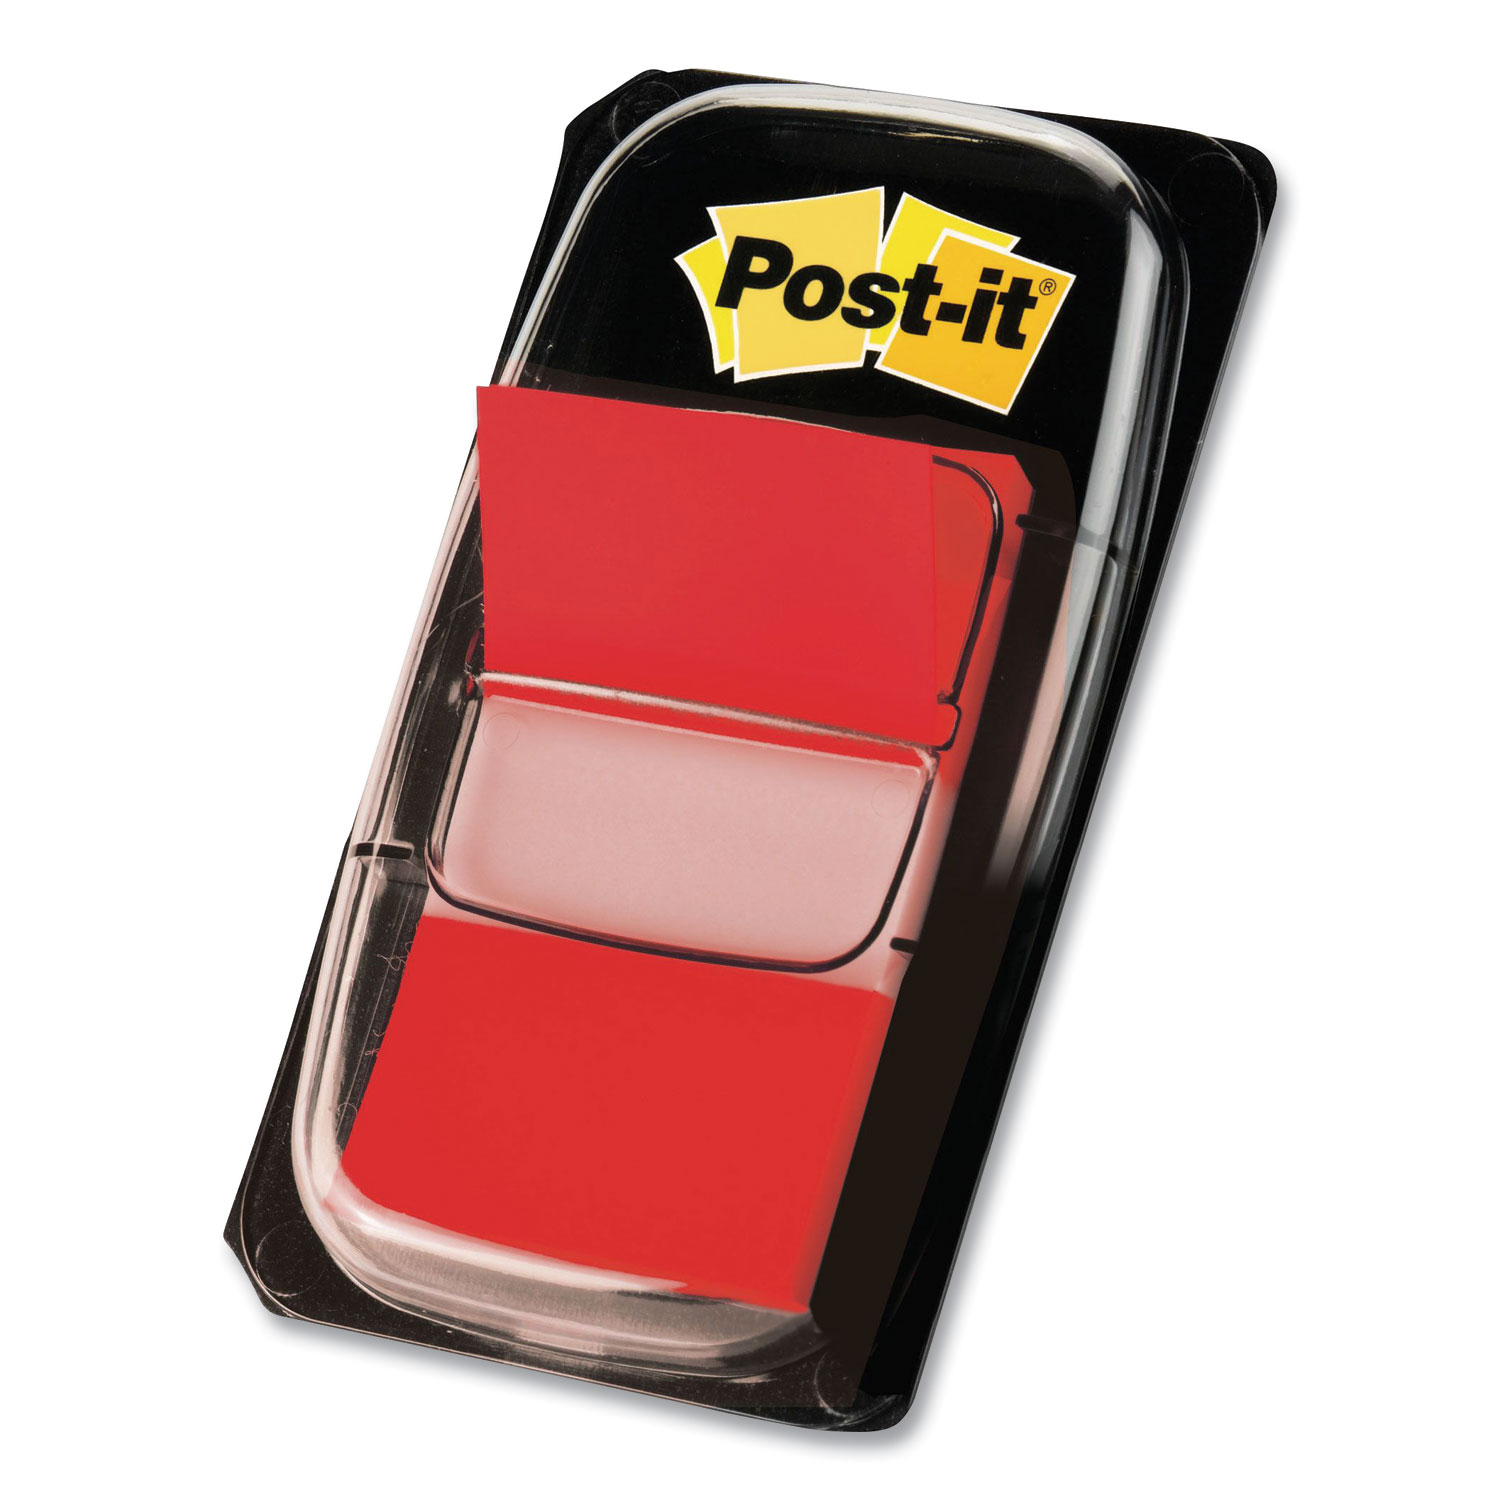  Post-it 680124 1 Flags Value Pack, Red, 50 Flags/Dispenser, 24 Dispensers/Pack (MMM689373) 